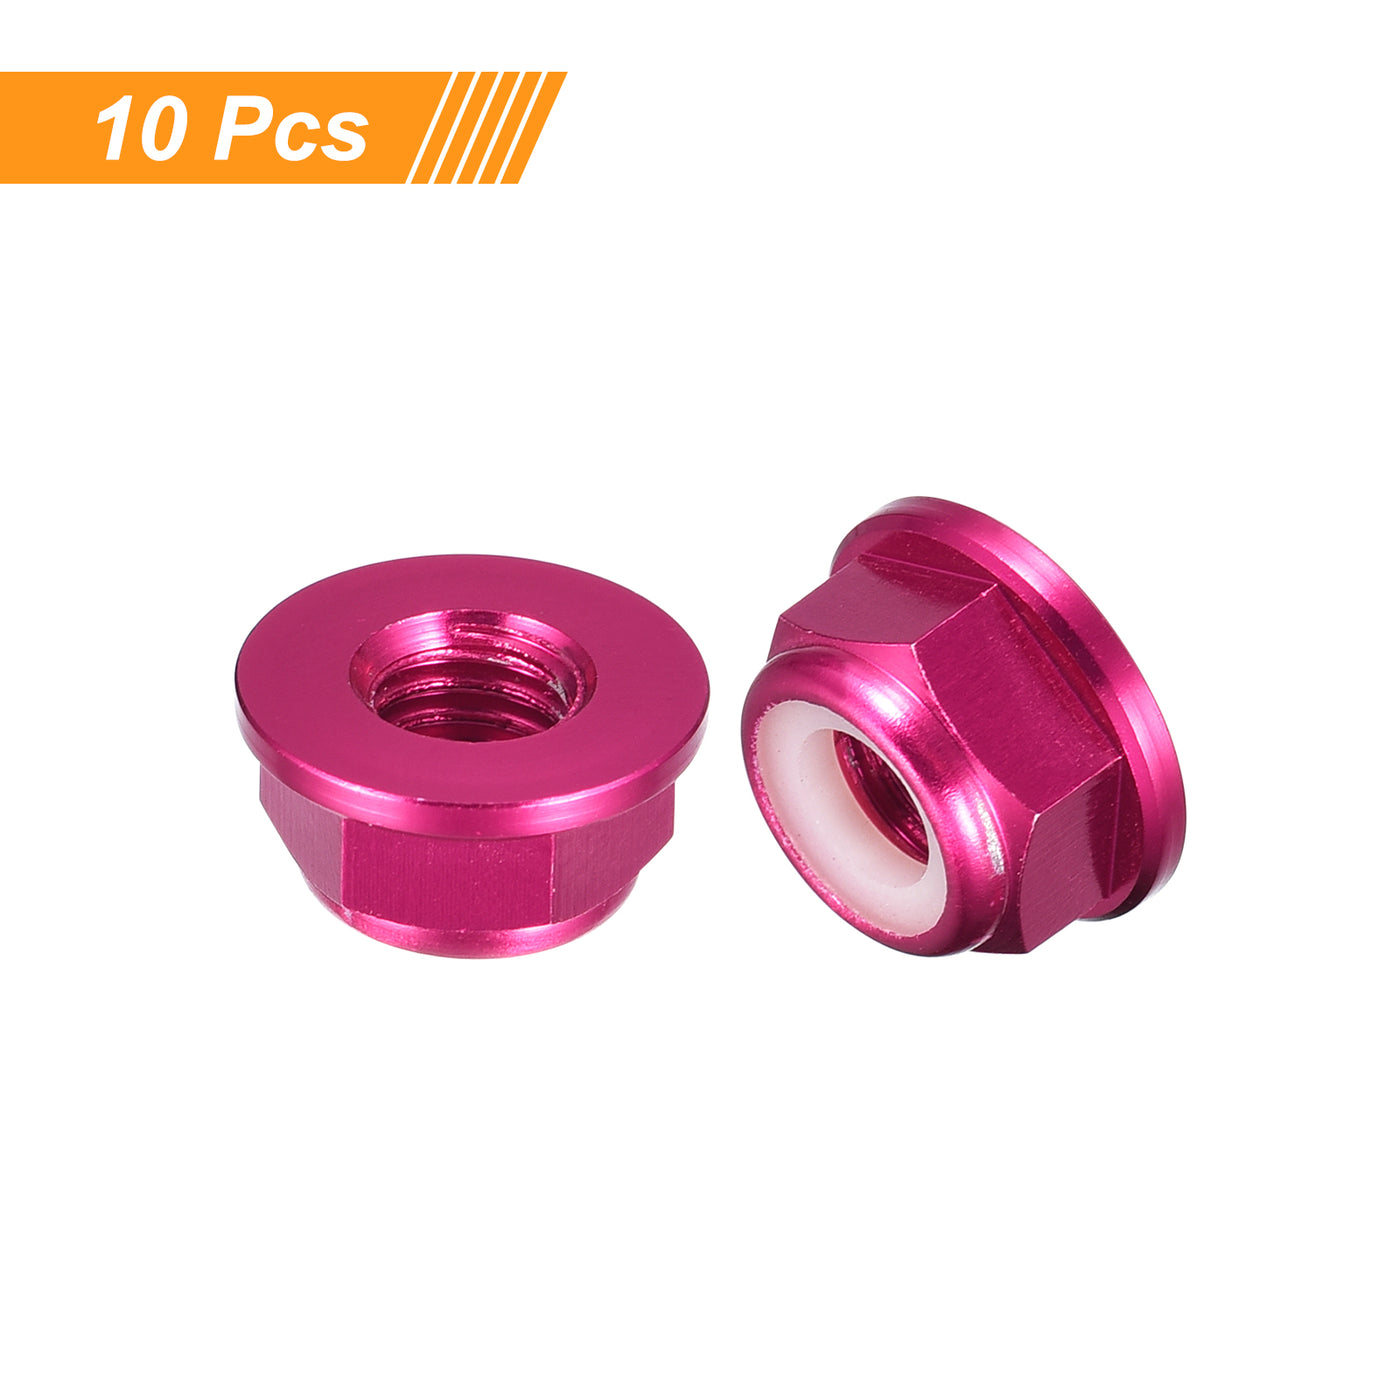 uxcell Uxcell Nylon Insert Hex Lock Nuts, 10pcs - M6 x 1mm Aluminum Alloy Self-Locking Nut, Anodizing Flange Lock Nut for Fasteners (Pink)